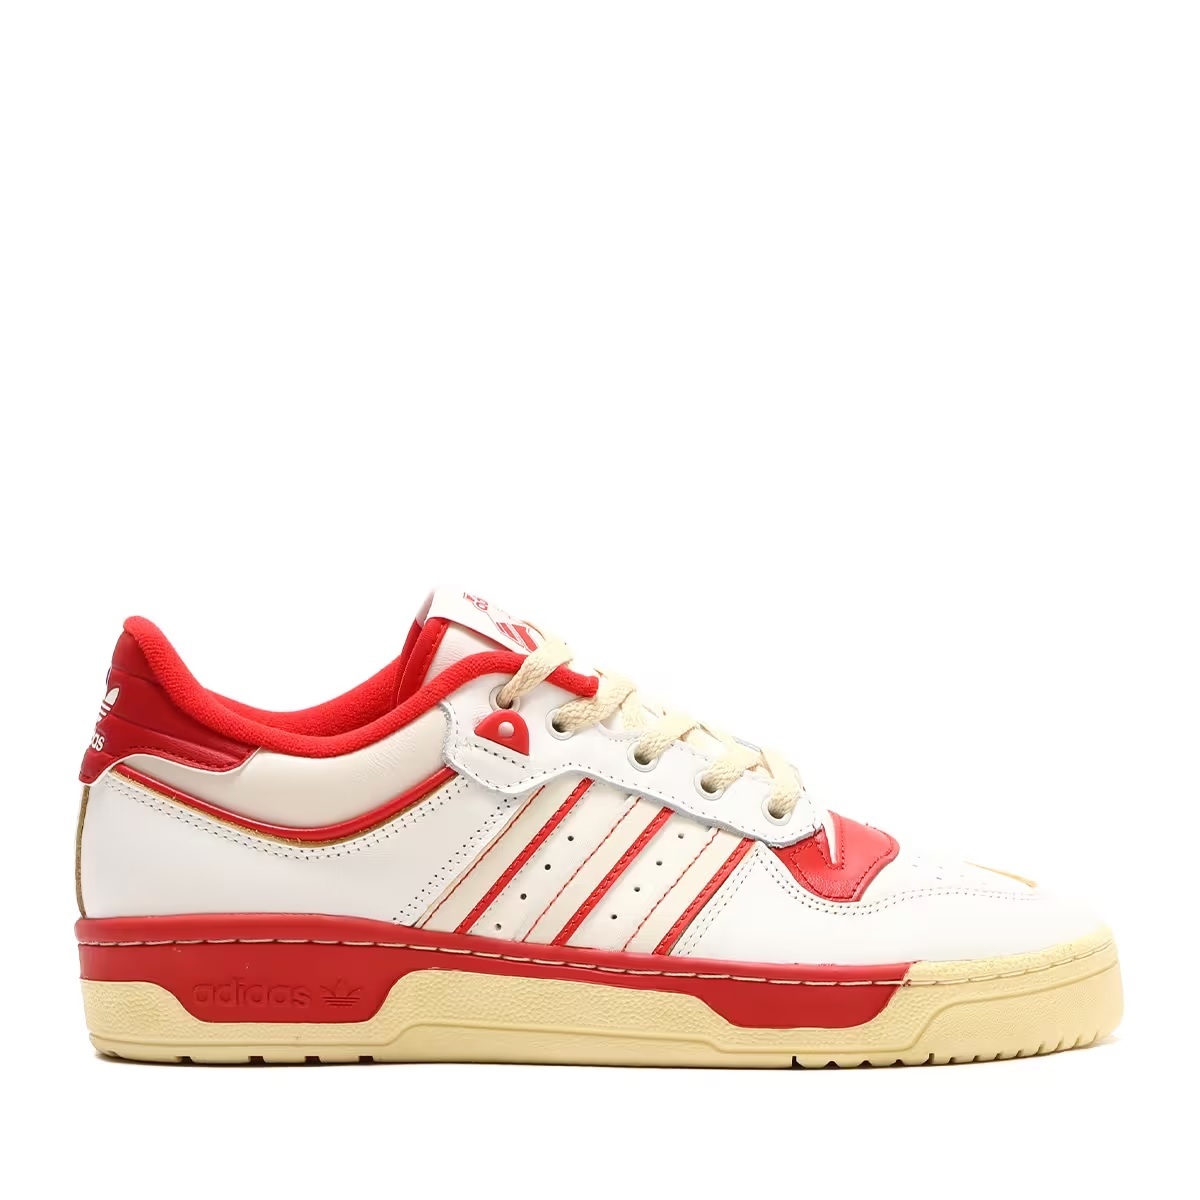  regular price 13200 jpy new goods regular goods Adidas great popularity reissue model Adidas li bar Lee low 86 leather white X red Vintage processing 27.